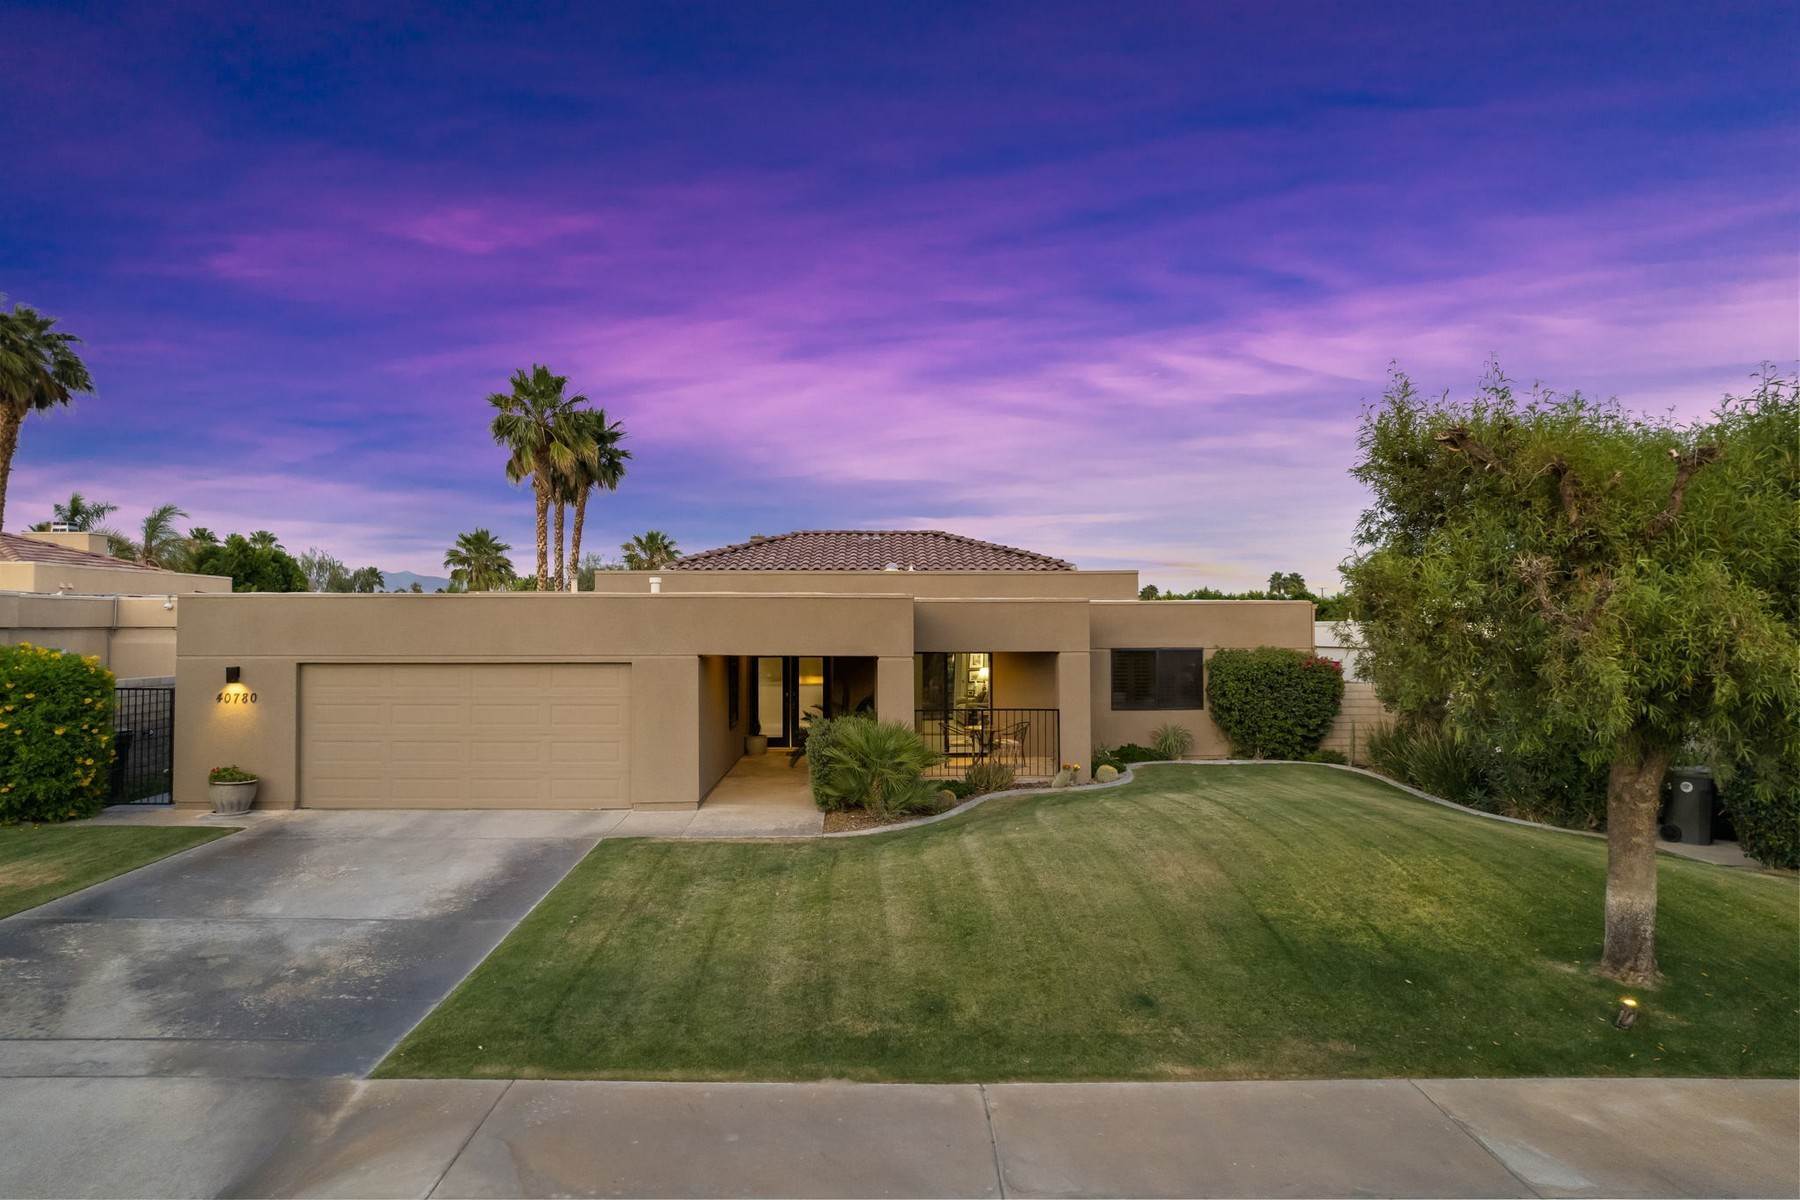 Single Family Homes for Sale at Gorgeous Contemporary Palm Desert Home 40780 Centennial Circle Palm Desert, California 92260 United States